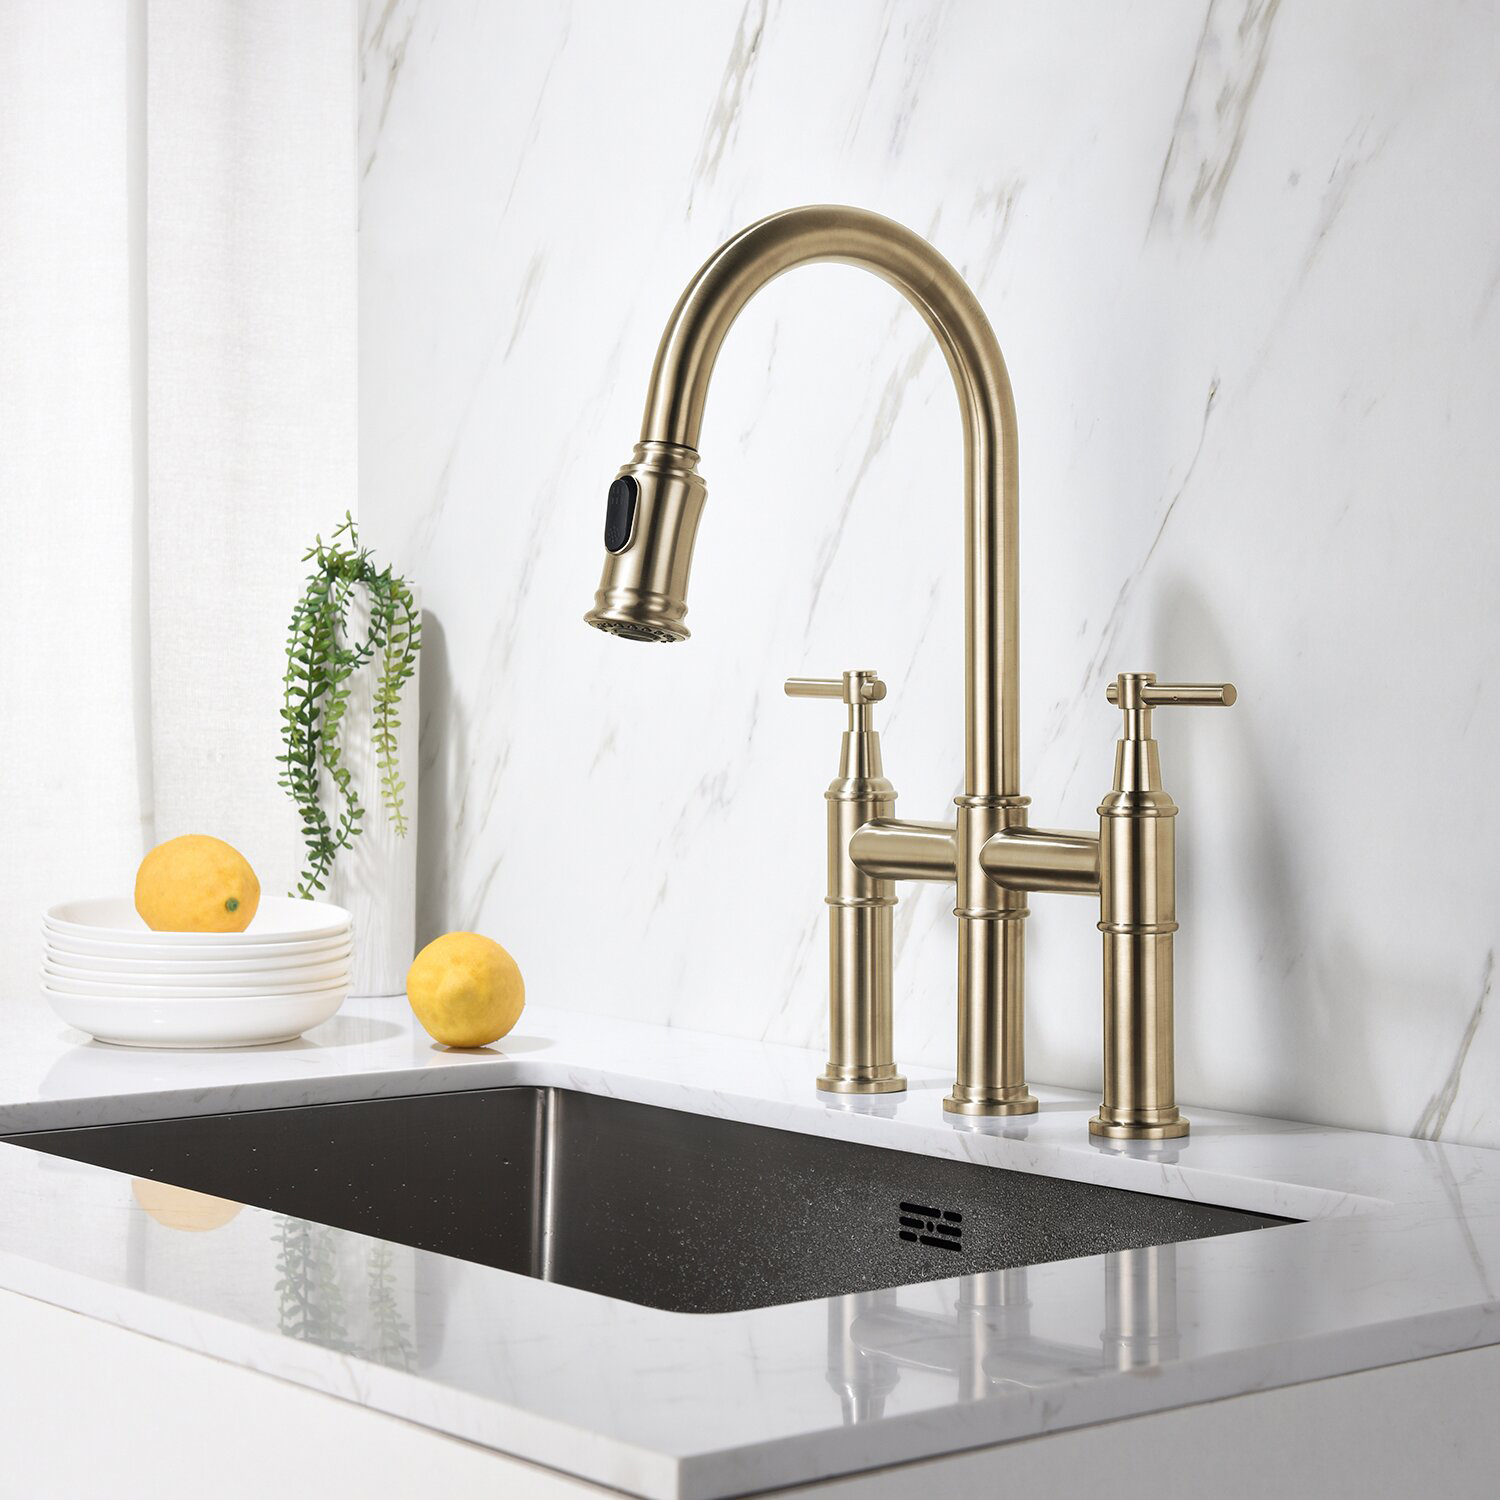 Brushed Gold Bridge Kitchen Faucet with Pull Down Sprayer, Oakland Brass Kitchen Faucet 3 Hole Spot-Resistant Lead-Free